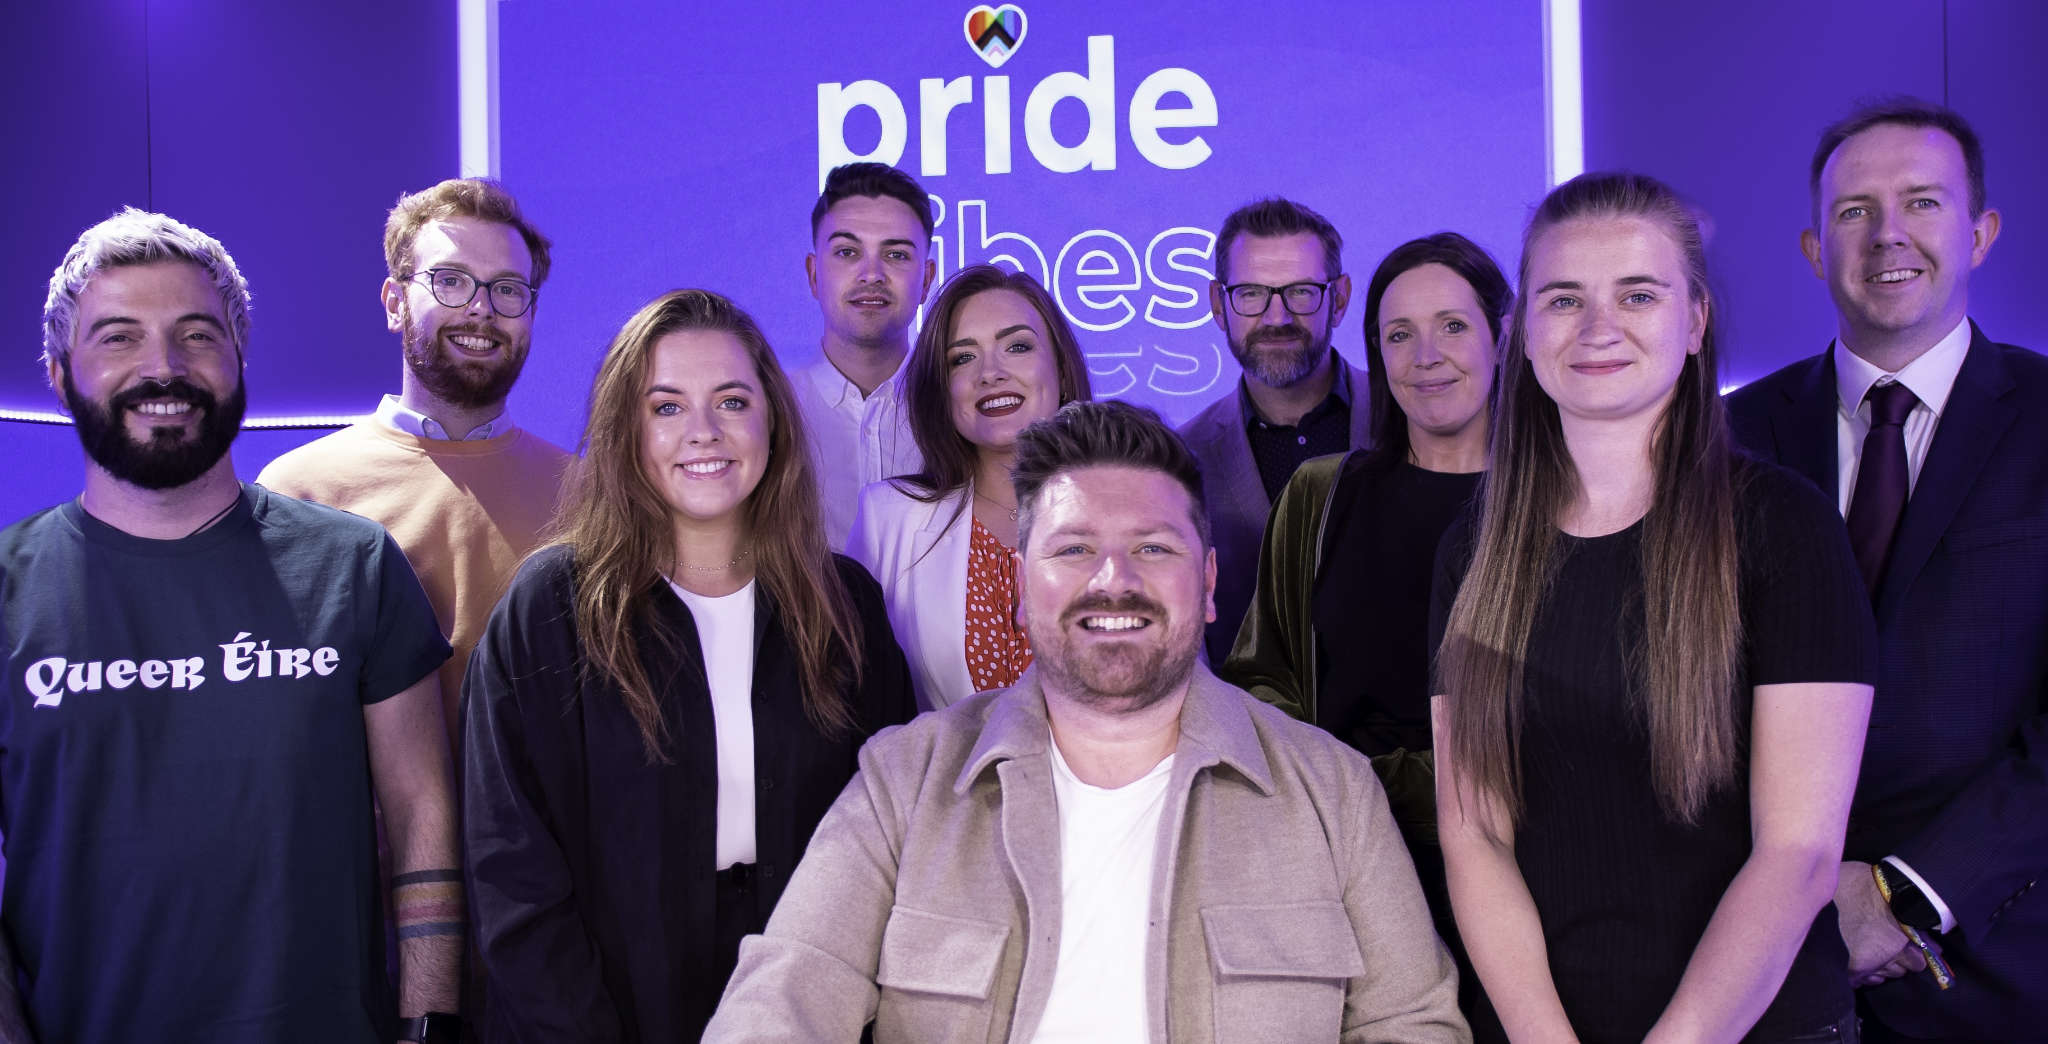 Pride Vibes returns bigger than ever in 2023 with first FM station